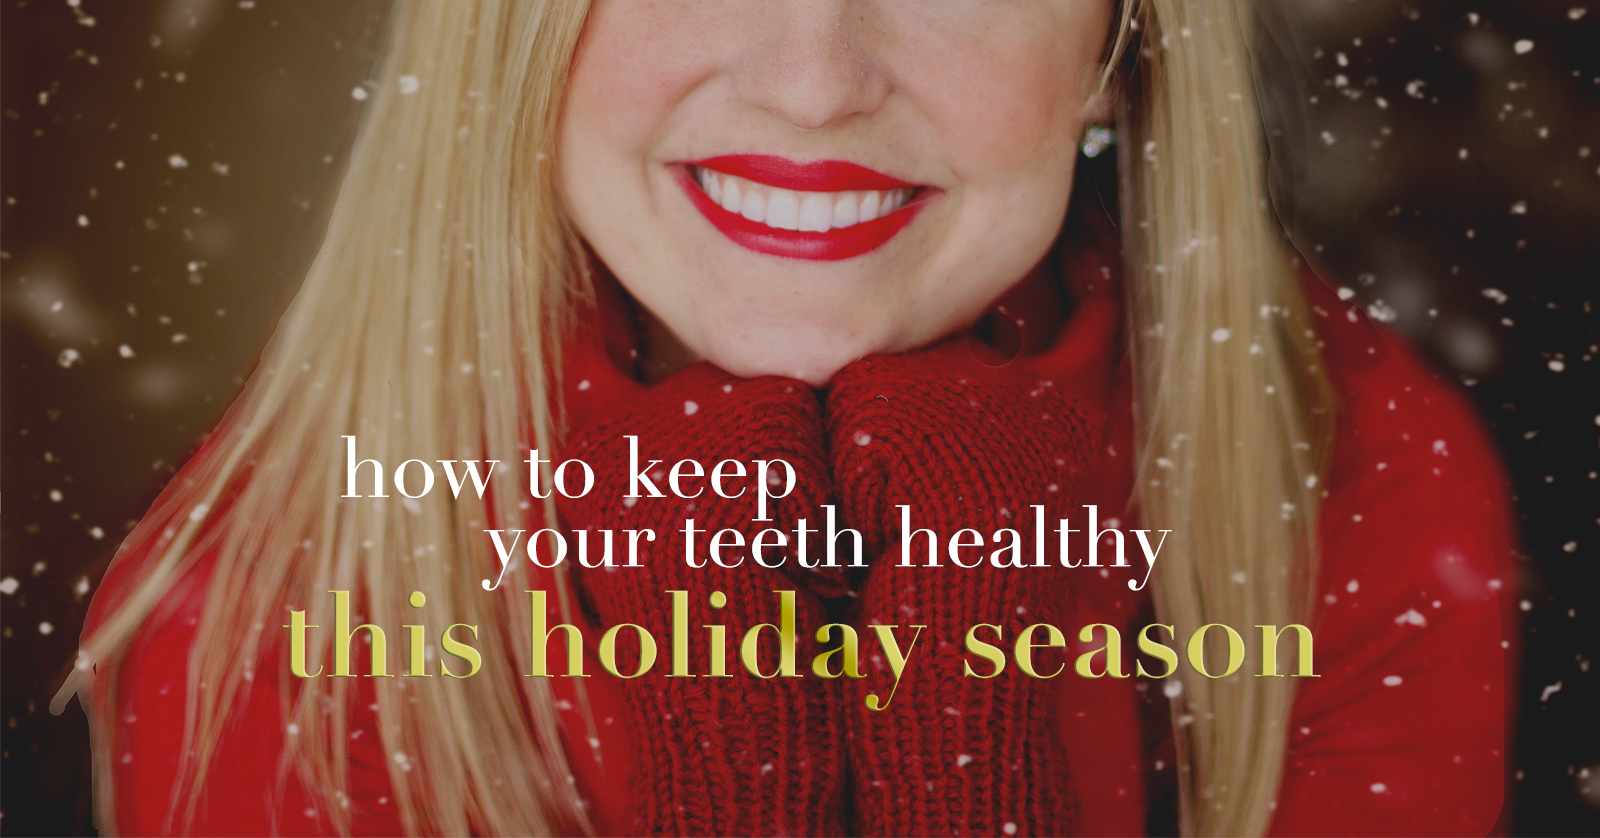 Woman in a red sweater and matching lipstick, smiling against a snowy backdrop with text about maintaining dental health during the holidays.